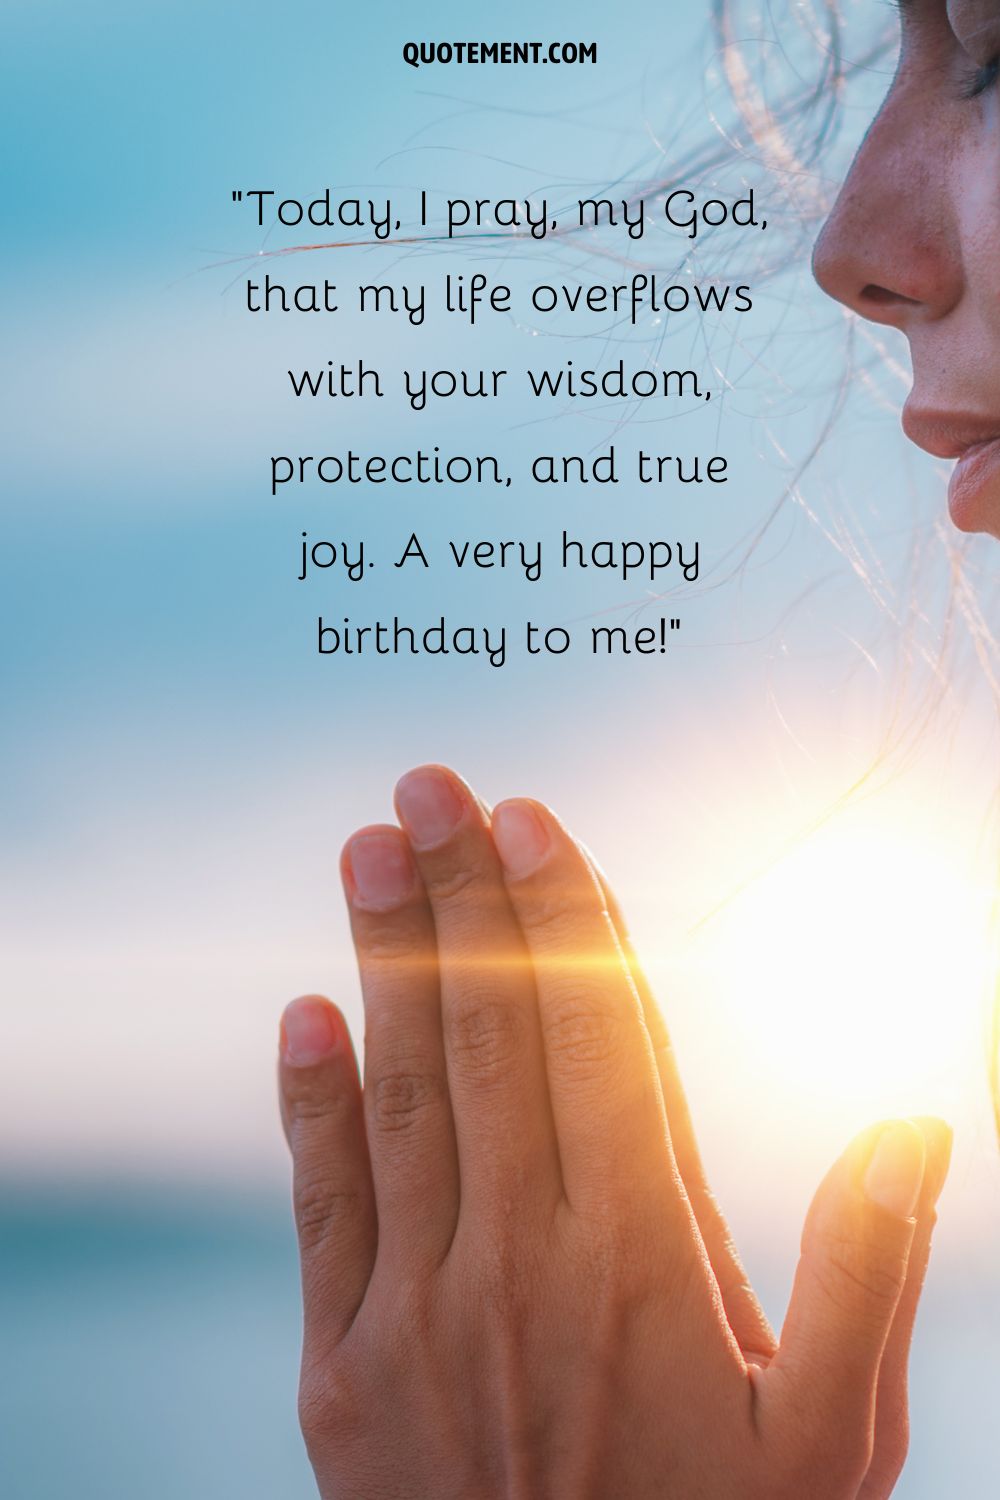 Today, I pray, my God, that my life overflows with your wisdom, protection, and true joy